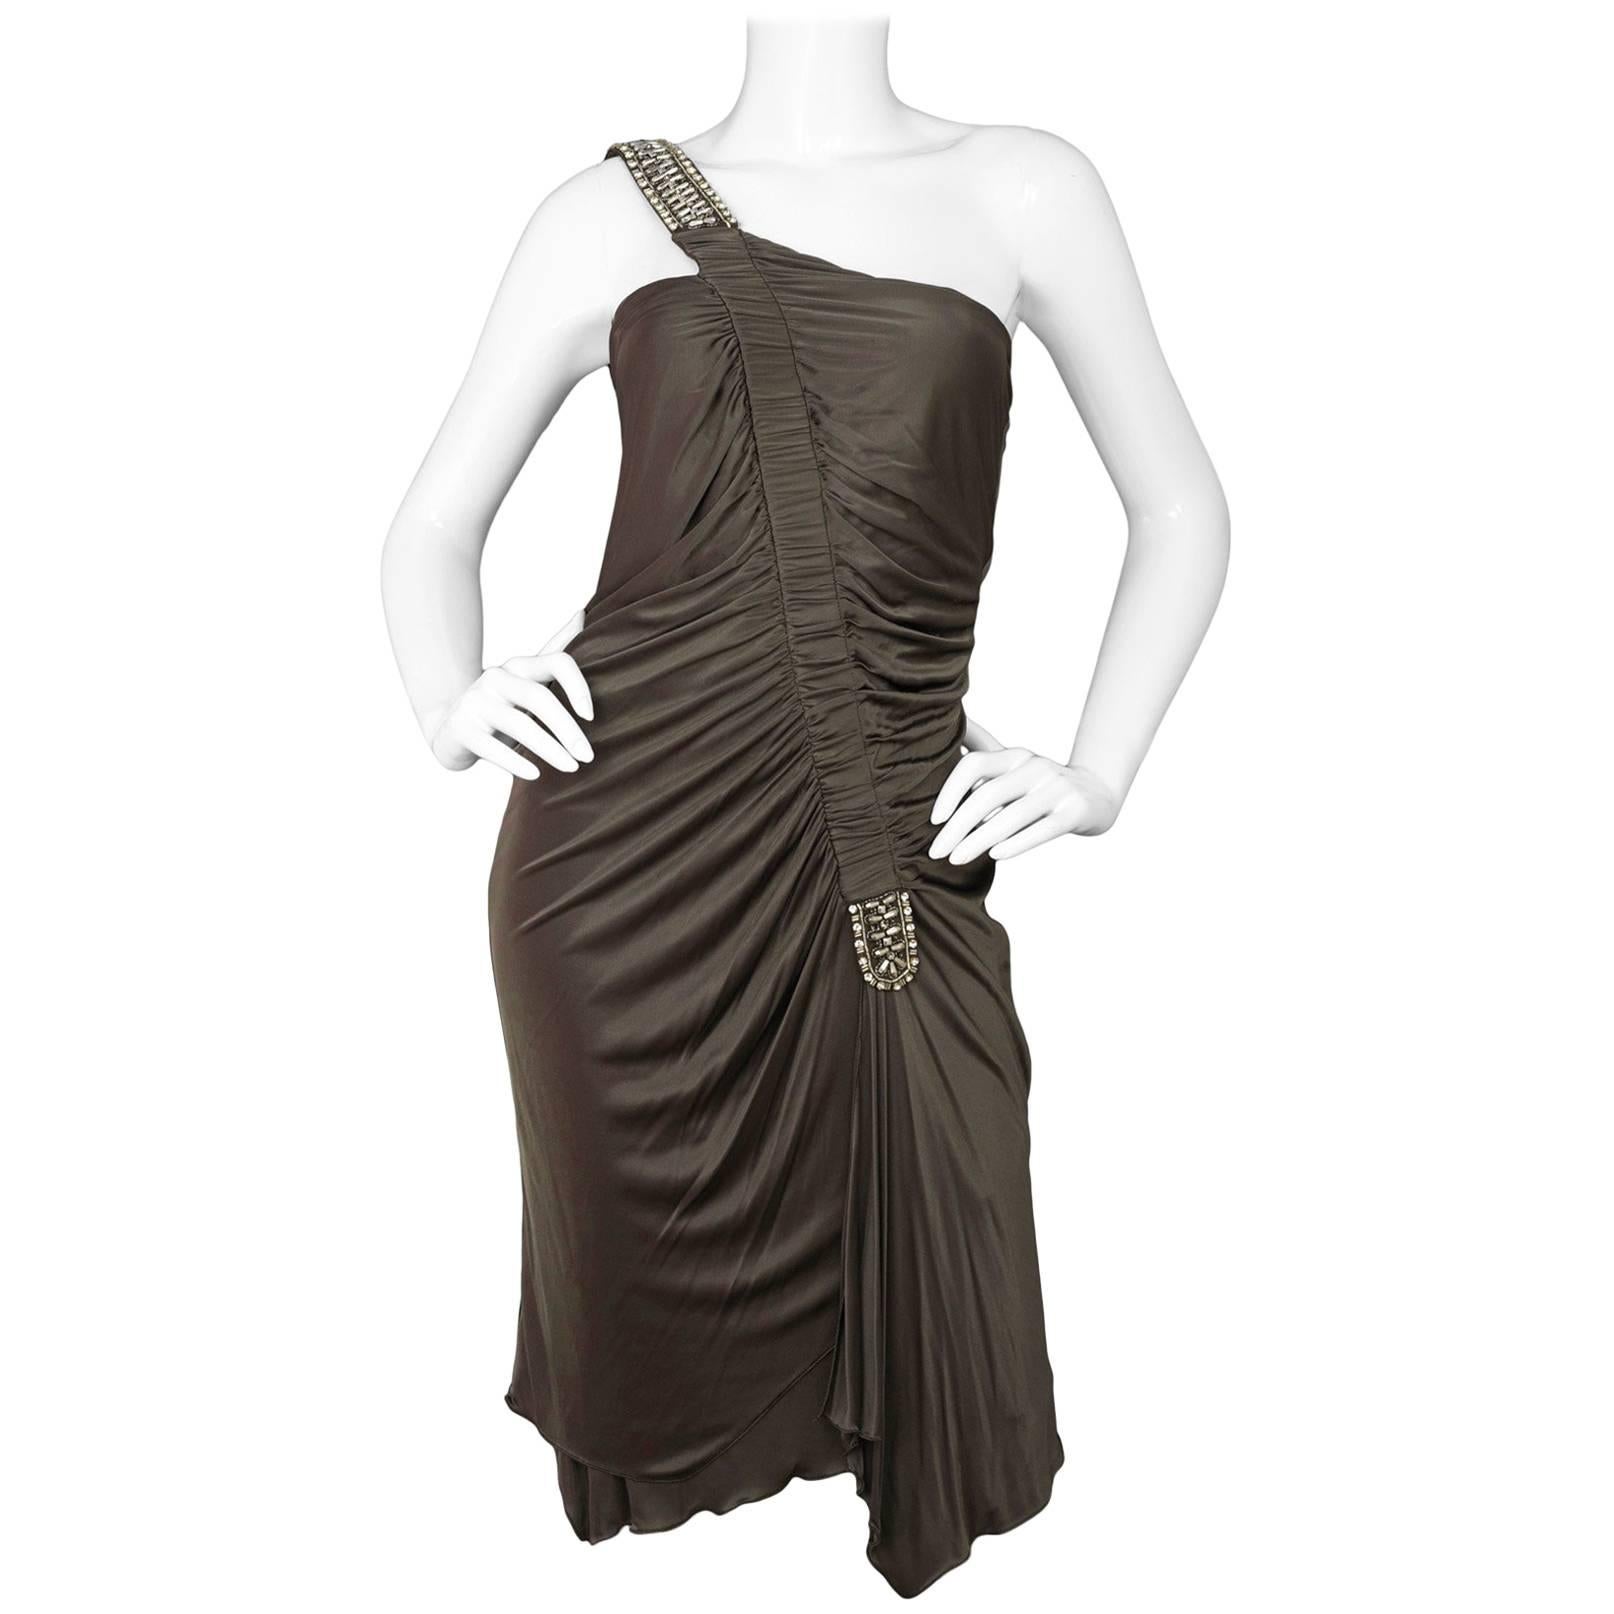 Roberto Cavalli Bronze Ruched One Shoulder Dress 
Features embellishments on one shoulder strap

Color: Bronze
Composition: Not given- believed to be a nylon/elastane-blend
Lining: Bronze Nylon-blend
Closure/Opening: Back zip up closure
Exterior